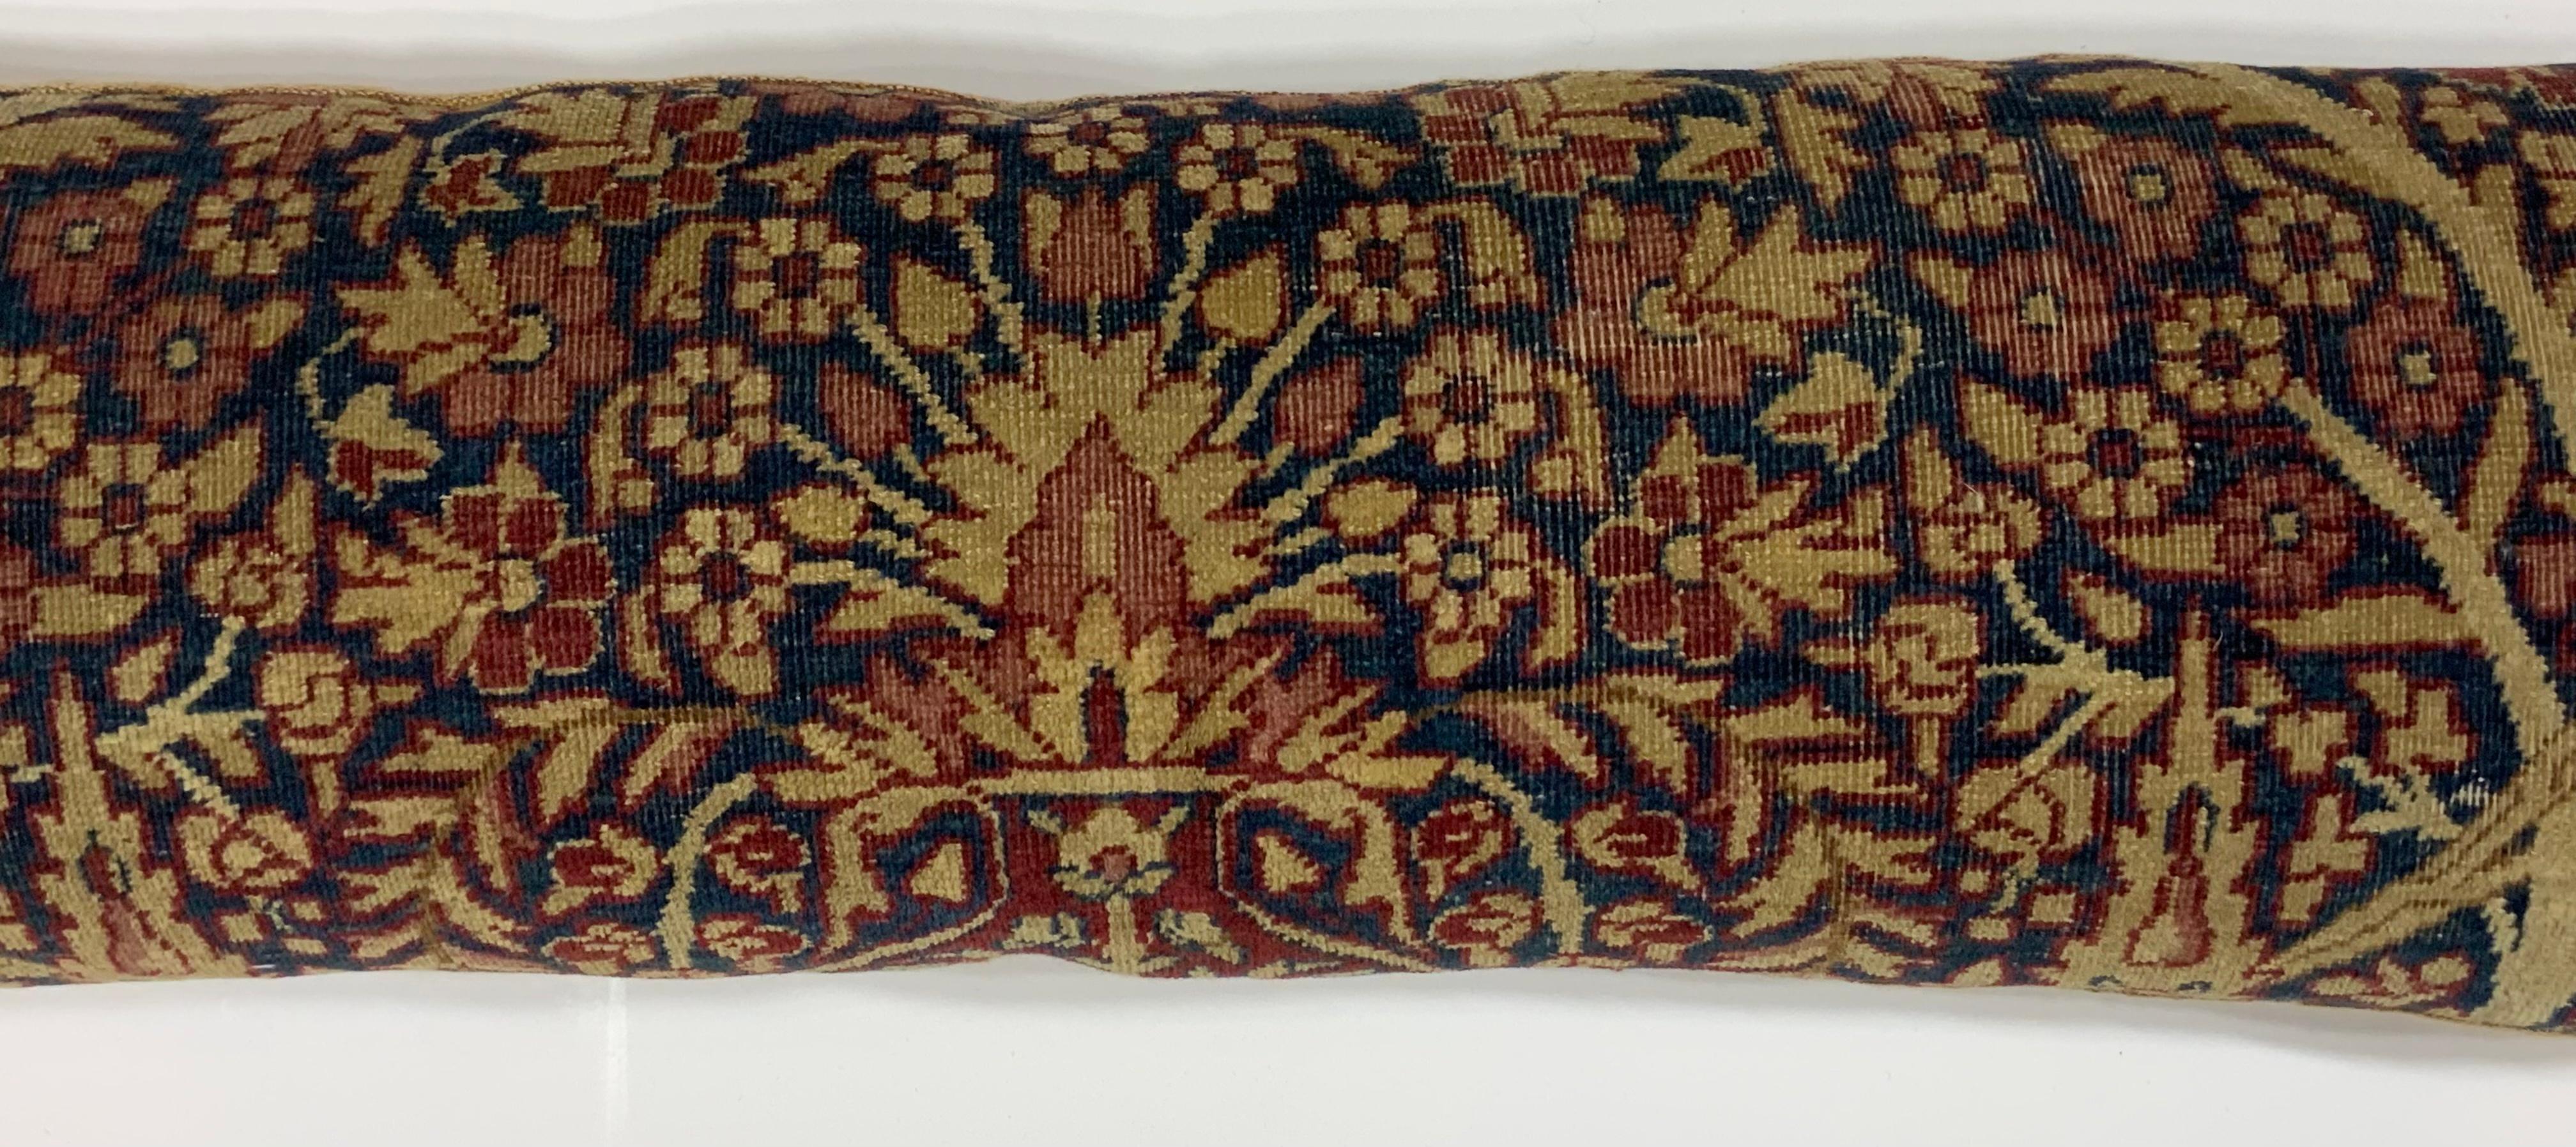 Hand-Woven Small Antique Hand Woven Pictorial Hand Woven Pillow